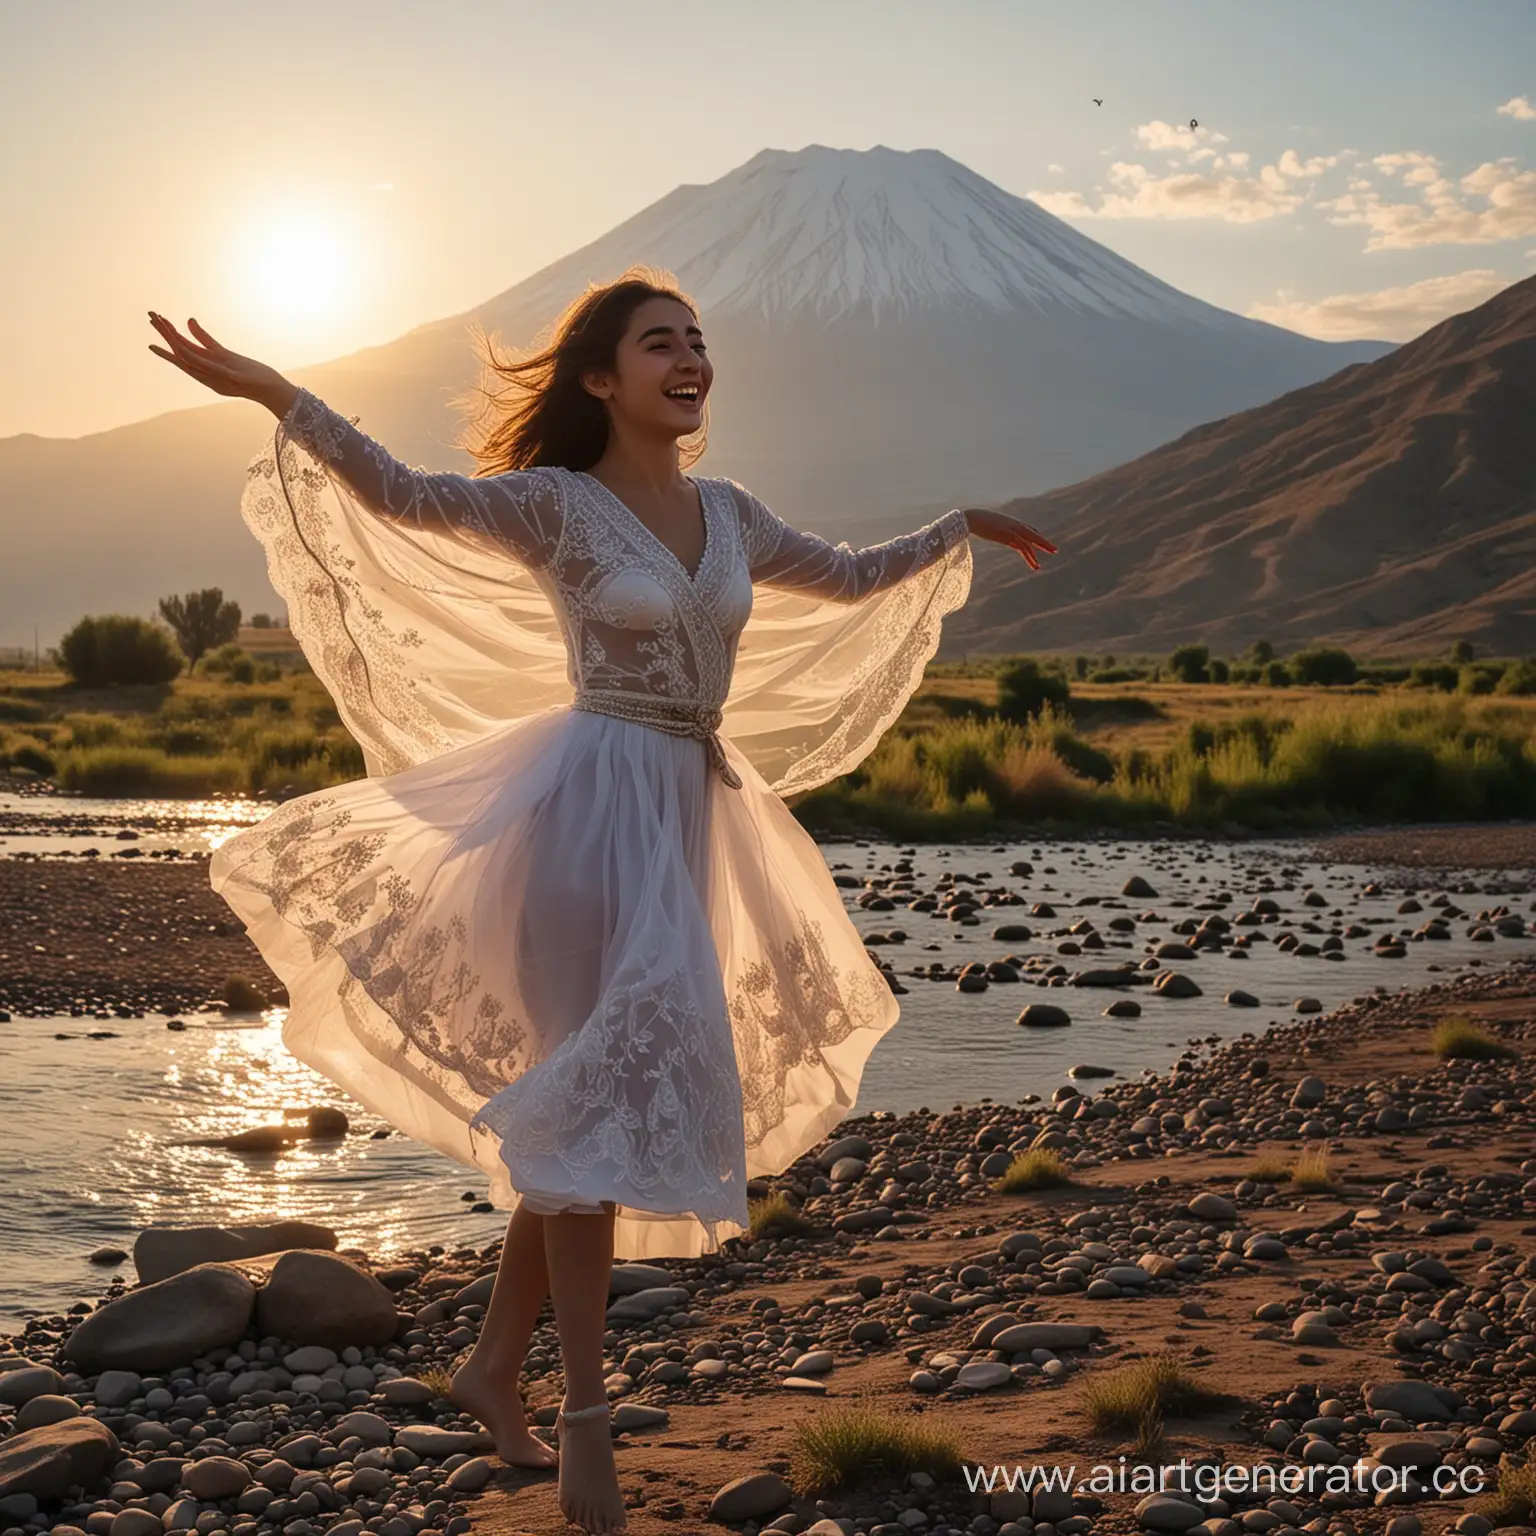 Graceful-Morning-Dance-by-the-Banks-of-Kura-River-with-Mount-Ararat-in-Armenia